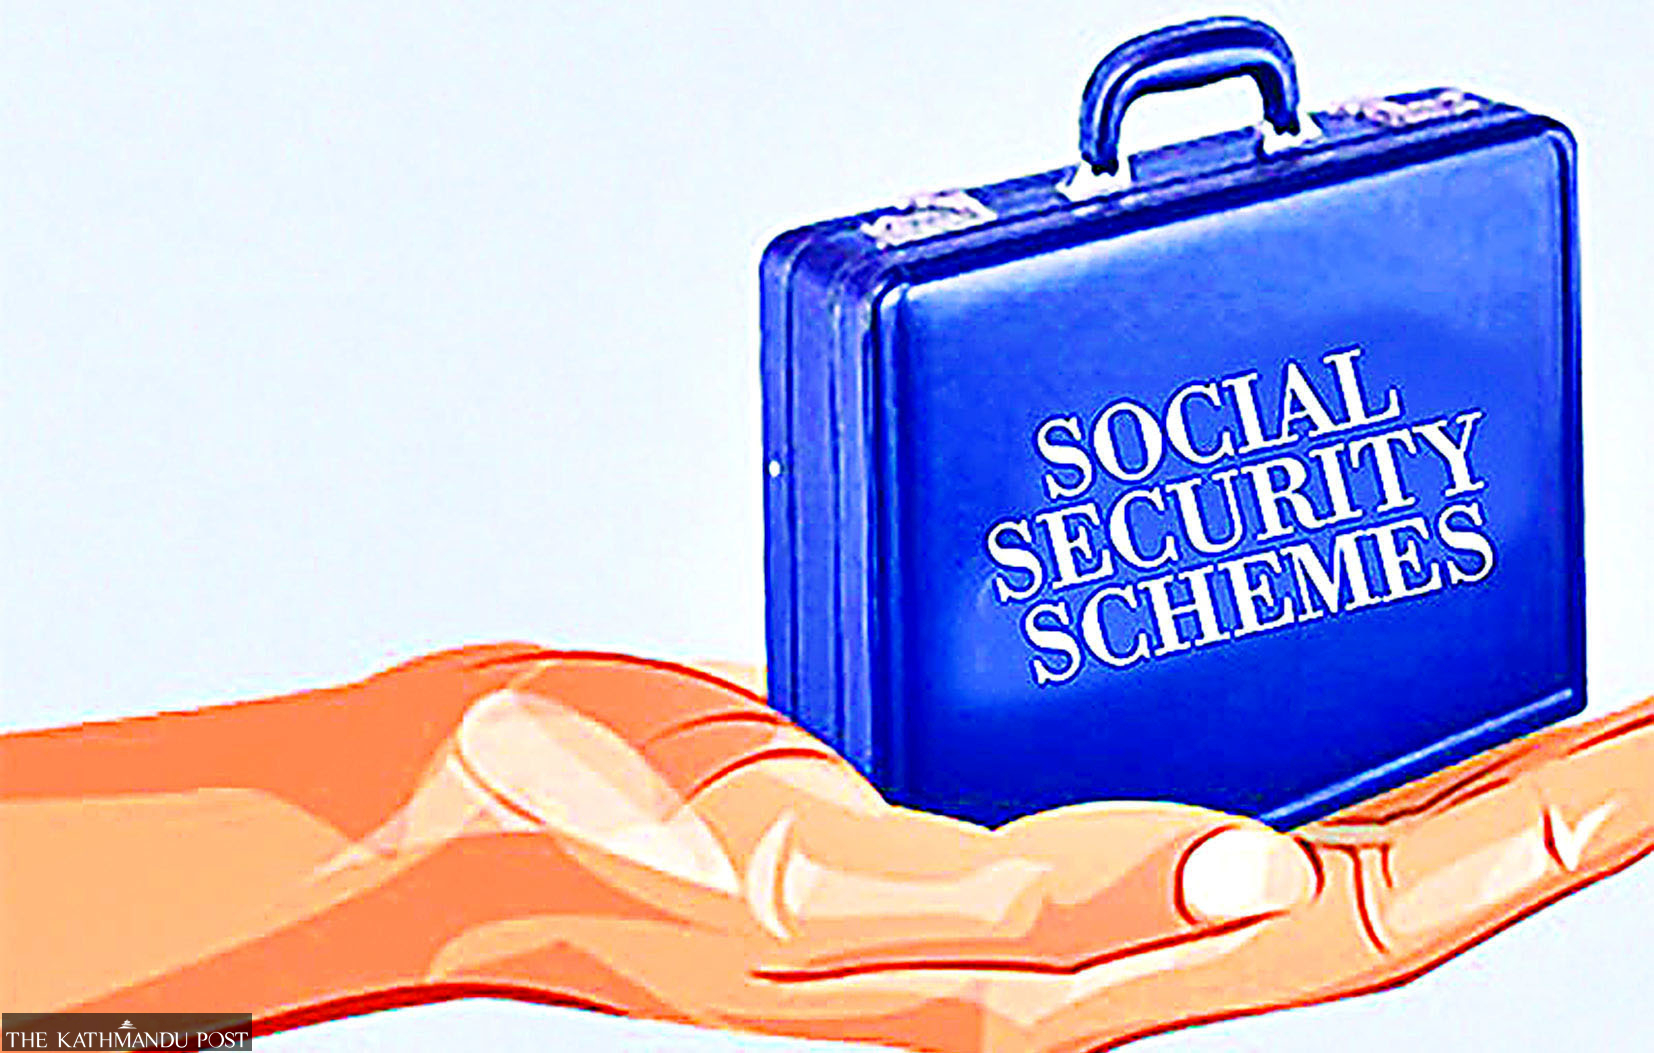 Government mulls options to ease growing burden of social security